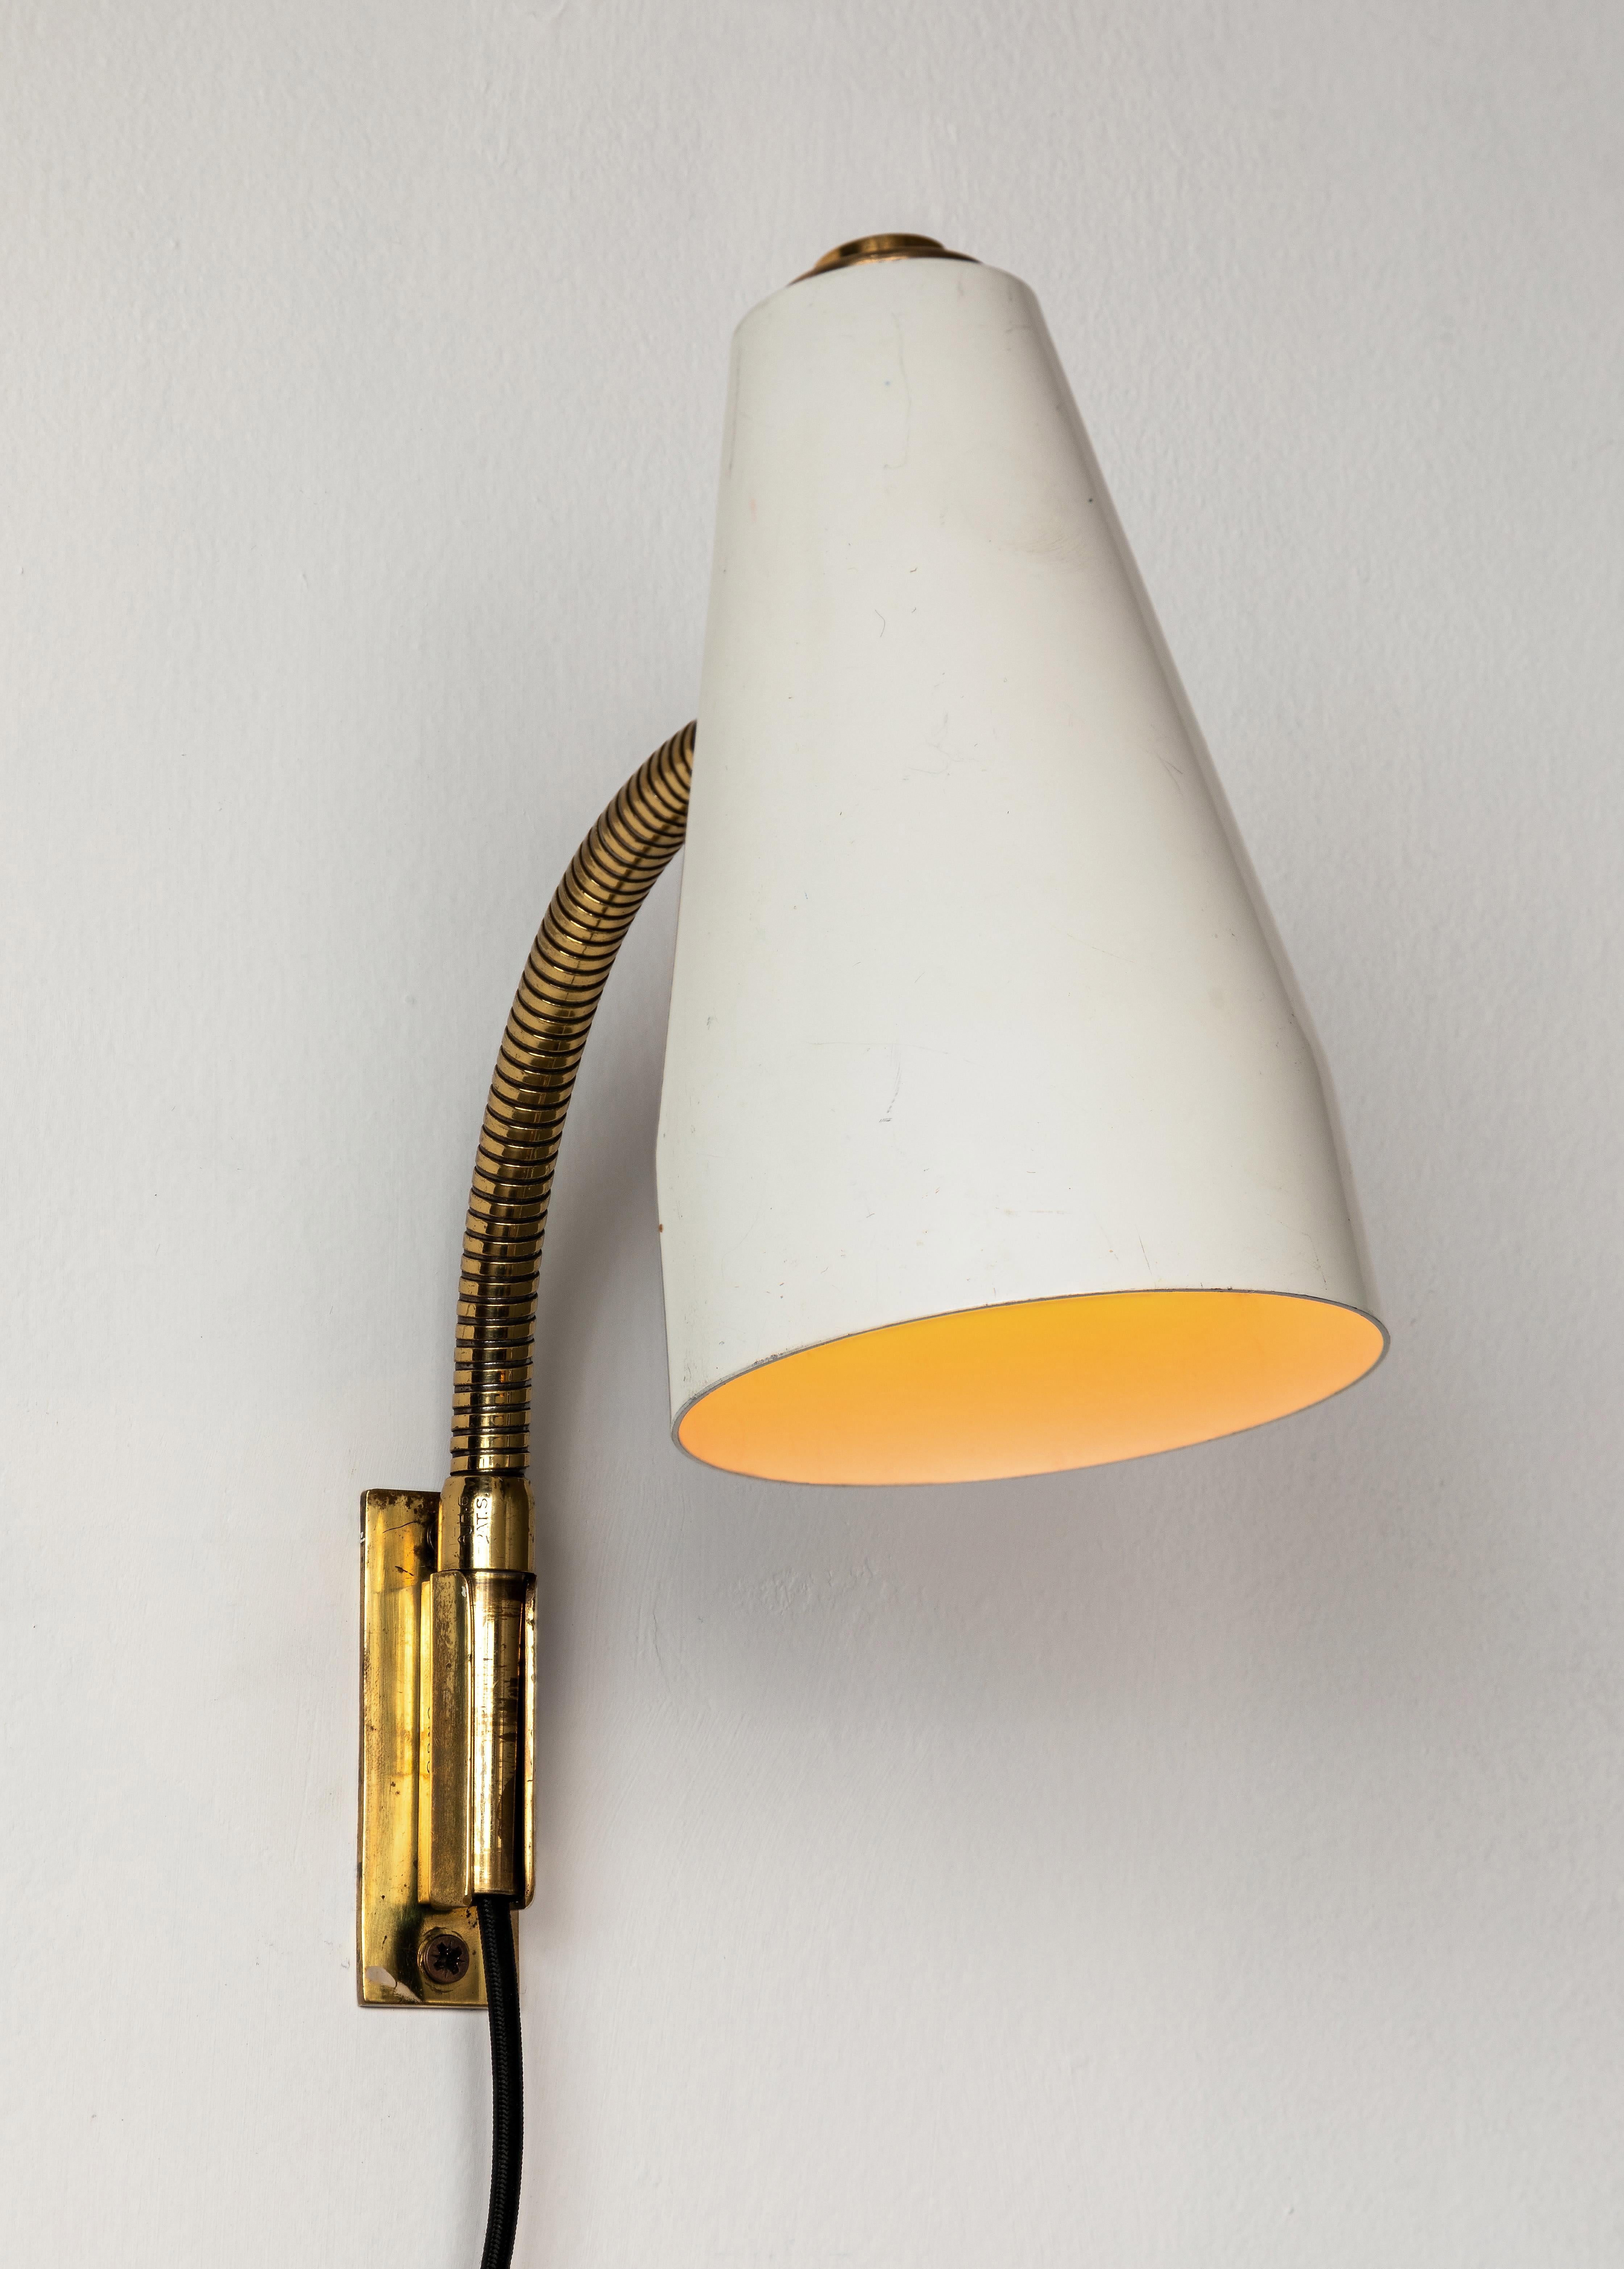 Pair of 1950s Lisa Johansson Pape Model #50-056/2 Wall Lights for Stockmann Orno. A highly versatile and adjustable pair of wall lights, the brass gooseneck arm with shade can be raised and lowered as well as rotated right and left. The articulating